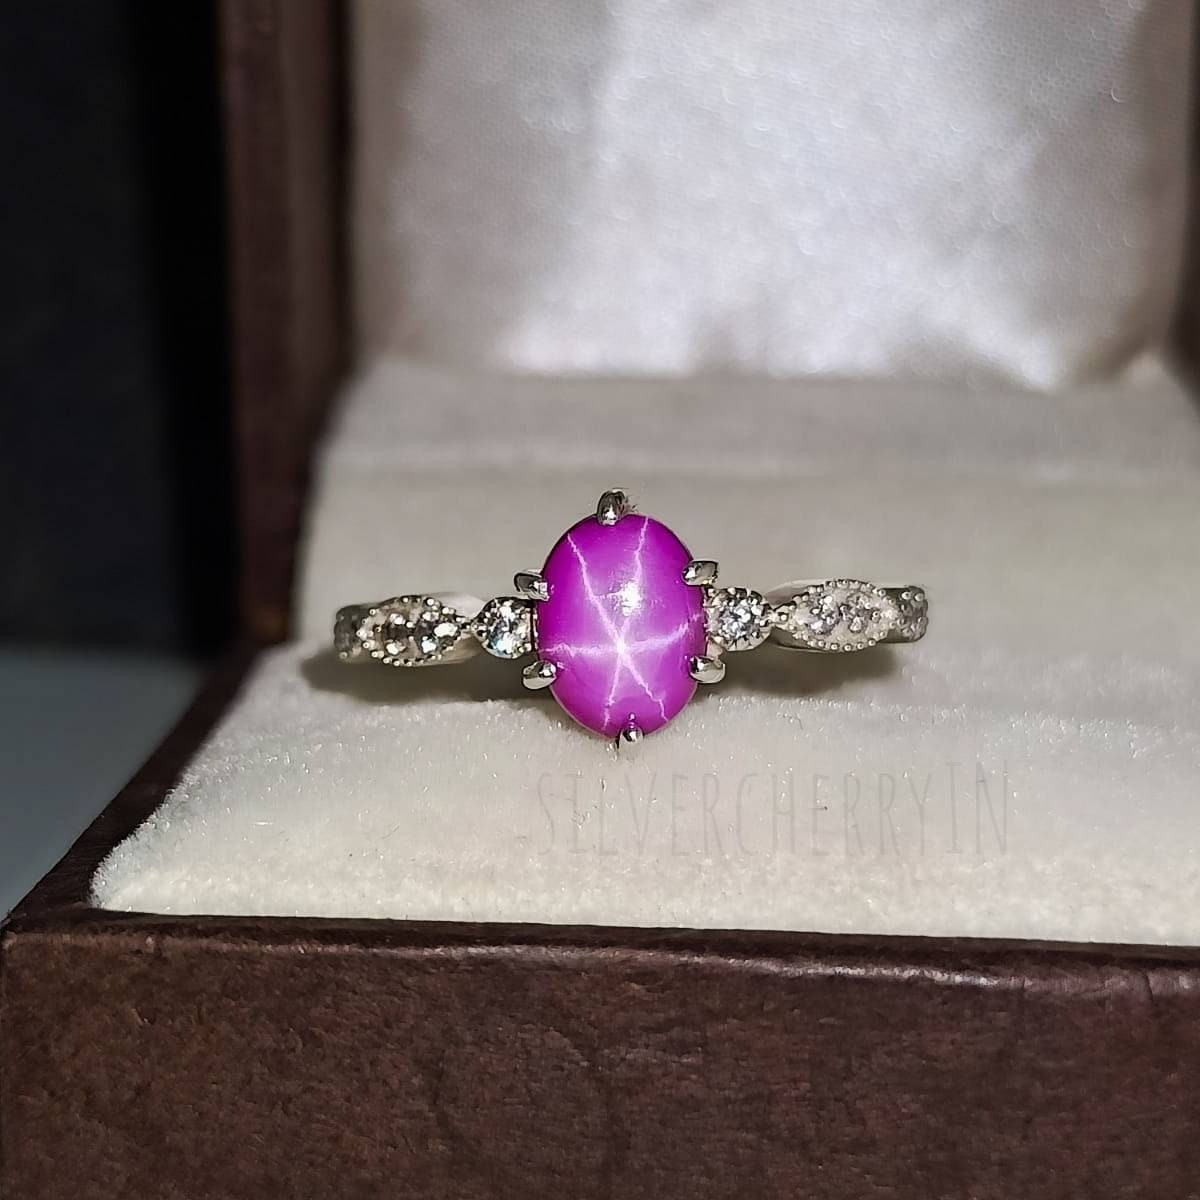 14k Yellow Gold Synthetic Pink Star Sapphire Ring with Pearls Size 7.5 |  eBay